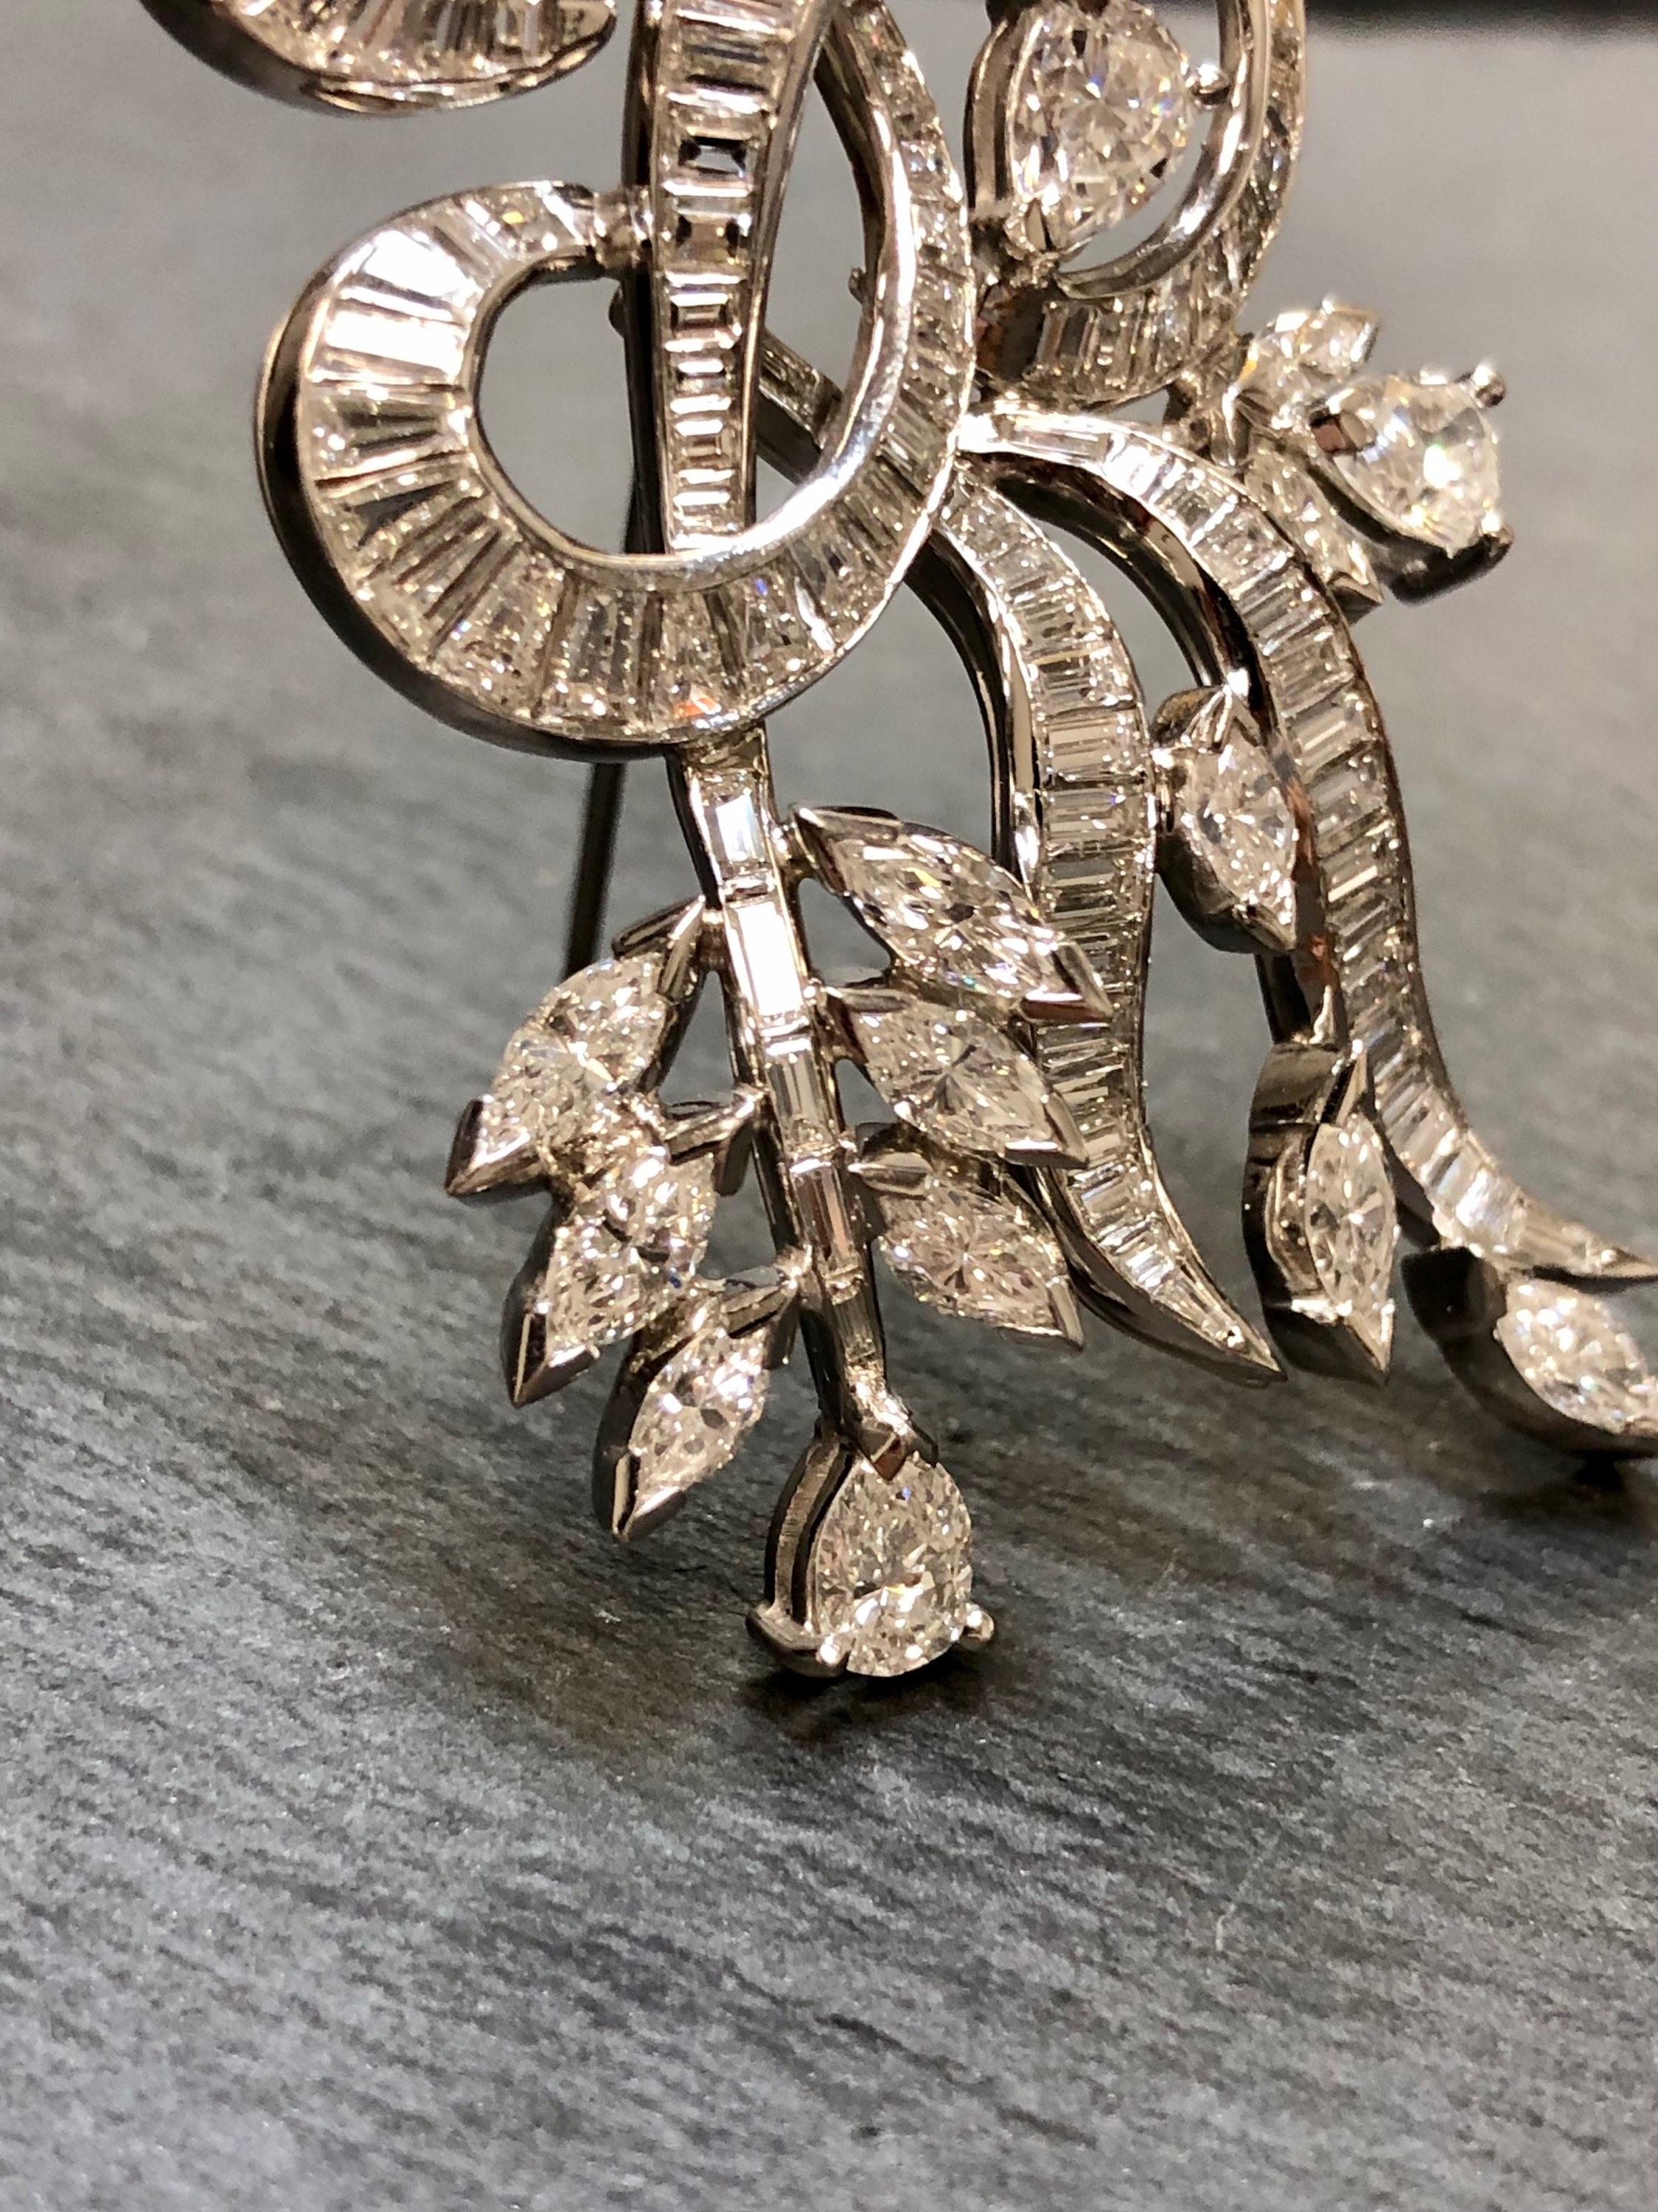 Gorgeous vintage circa 1950’s brooch done in platinum and set with approximately 8cttw in G-I Vs clarity baguette, marquise and large pear shape diamonds.

Dimensions/Weight
1 3/4” long by 1 1/4” wide. Weighs 11.1dwt.

Condition
All stones are